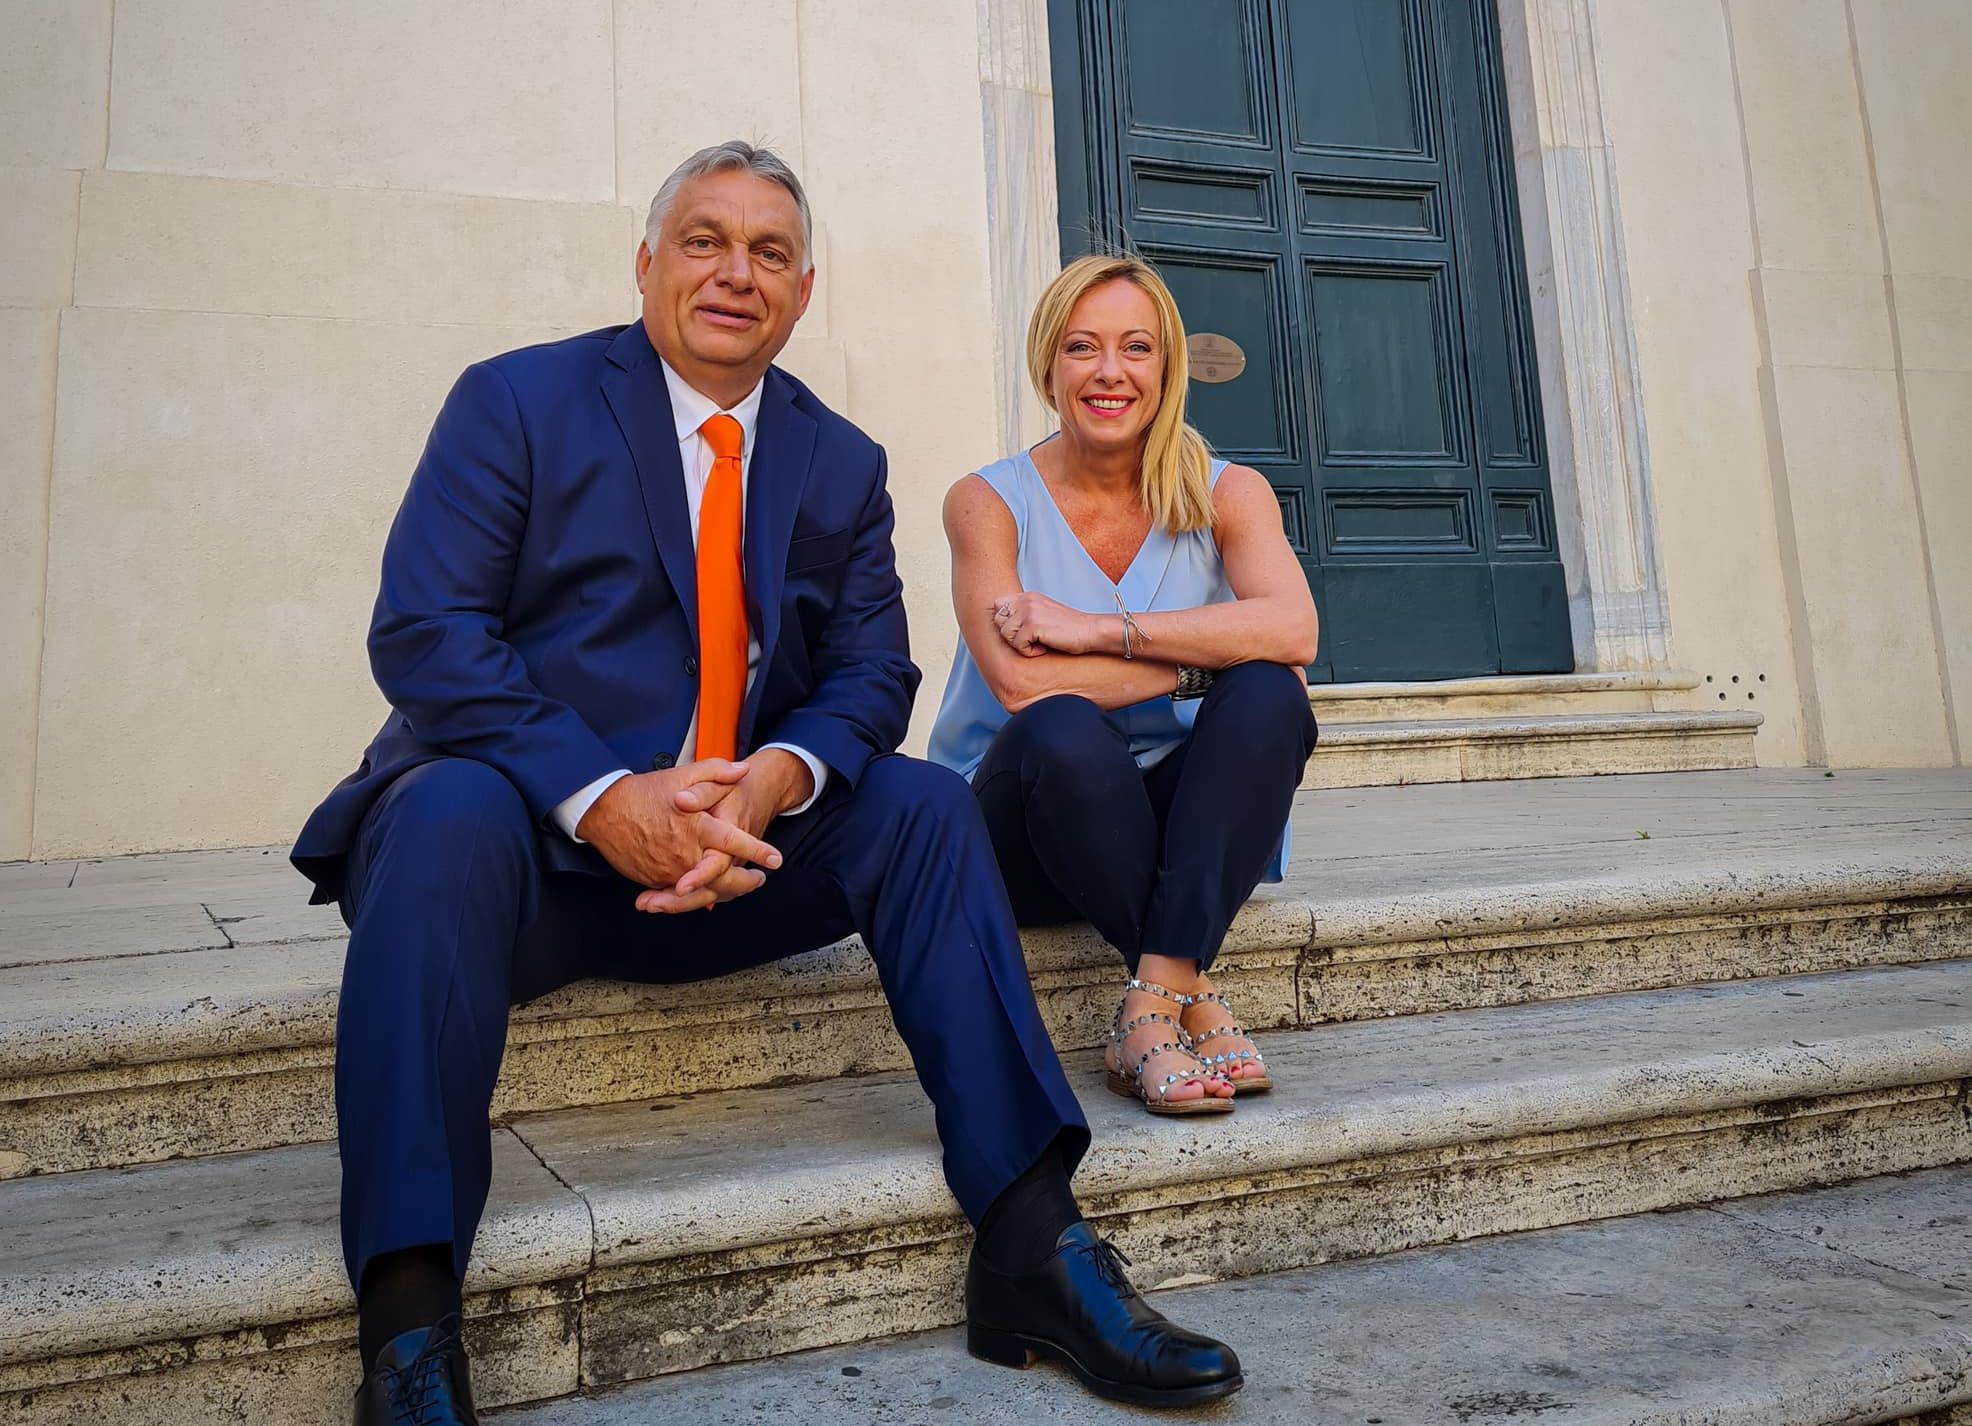 PM Orbán Meets Fratelli d'Italia Leader in Rome